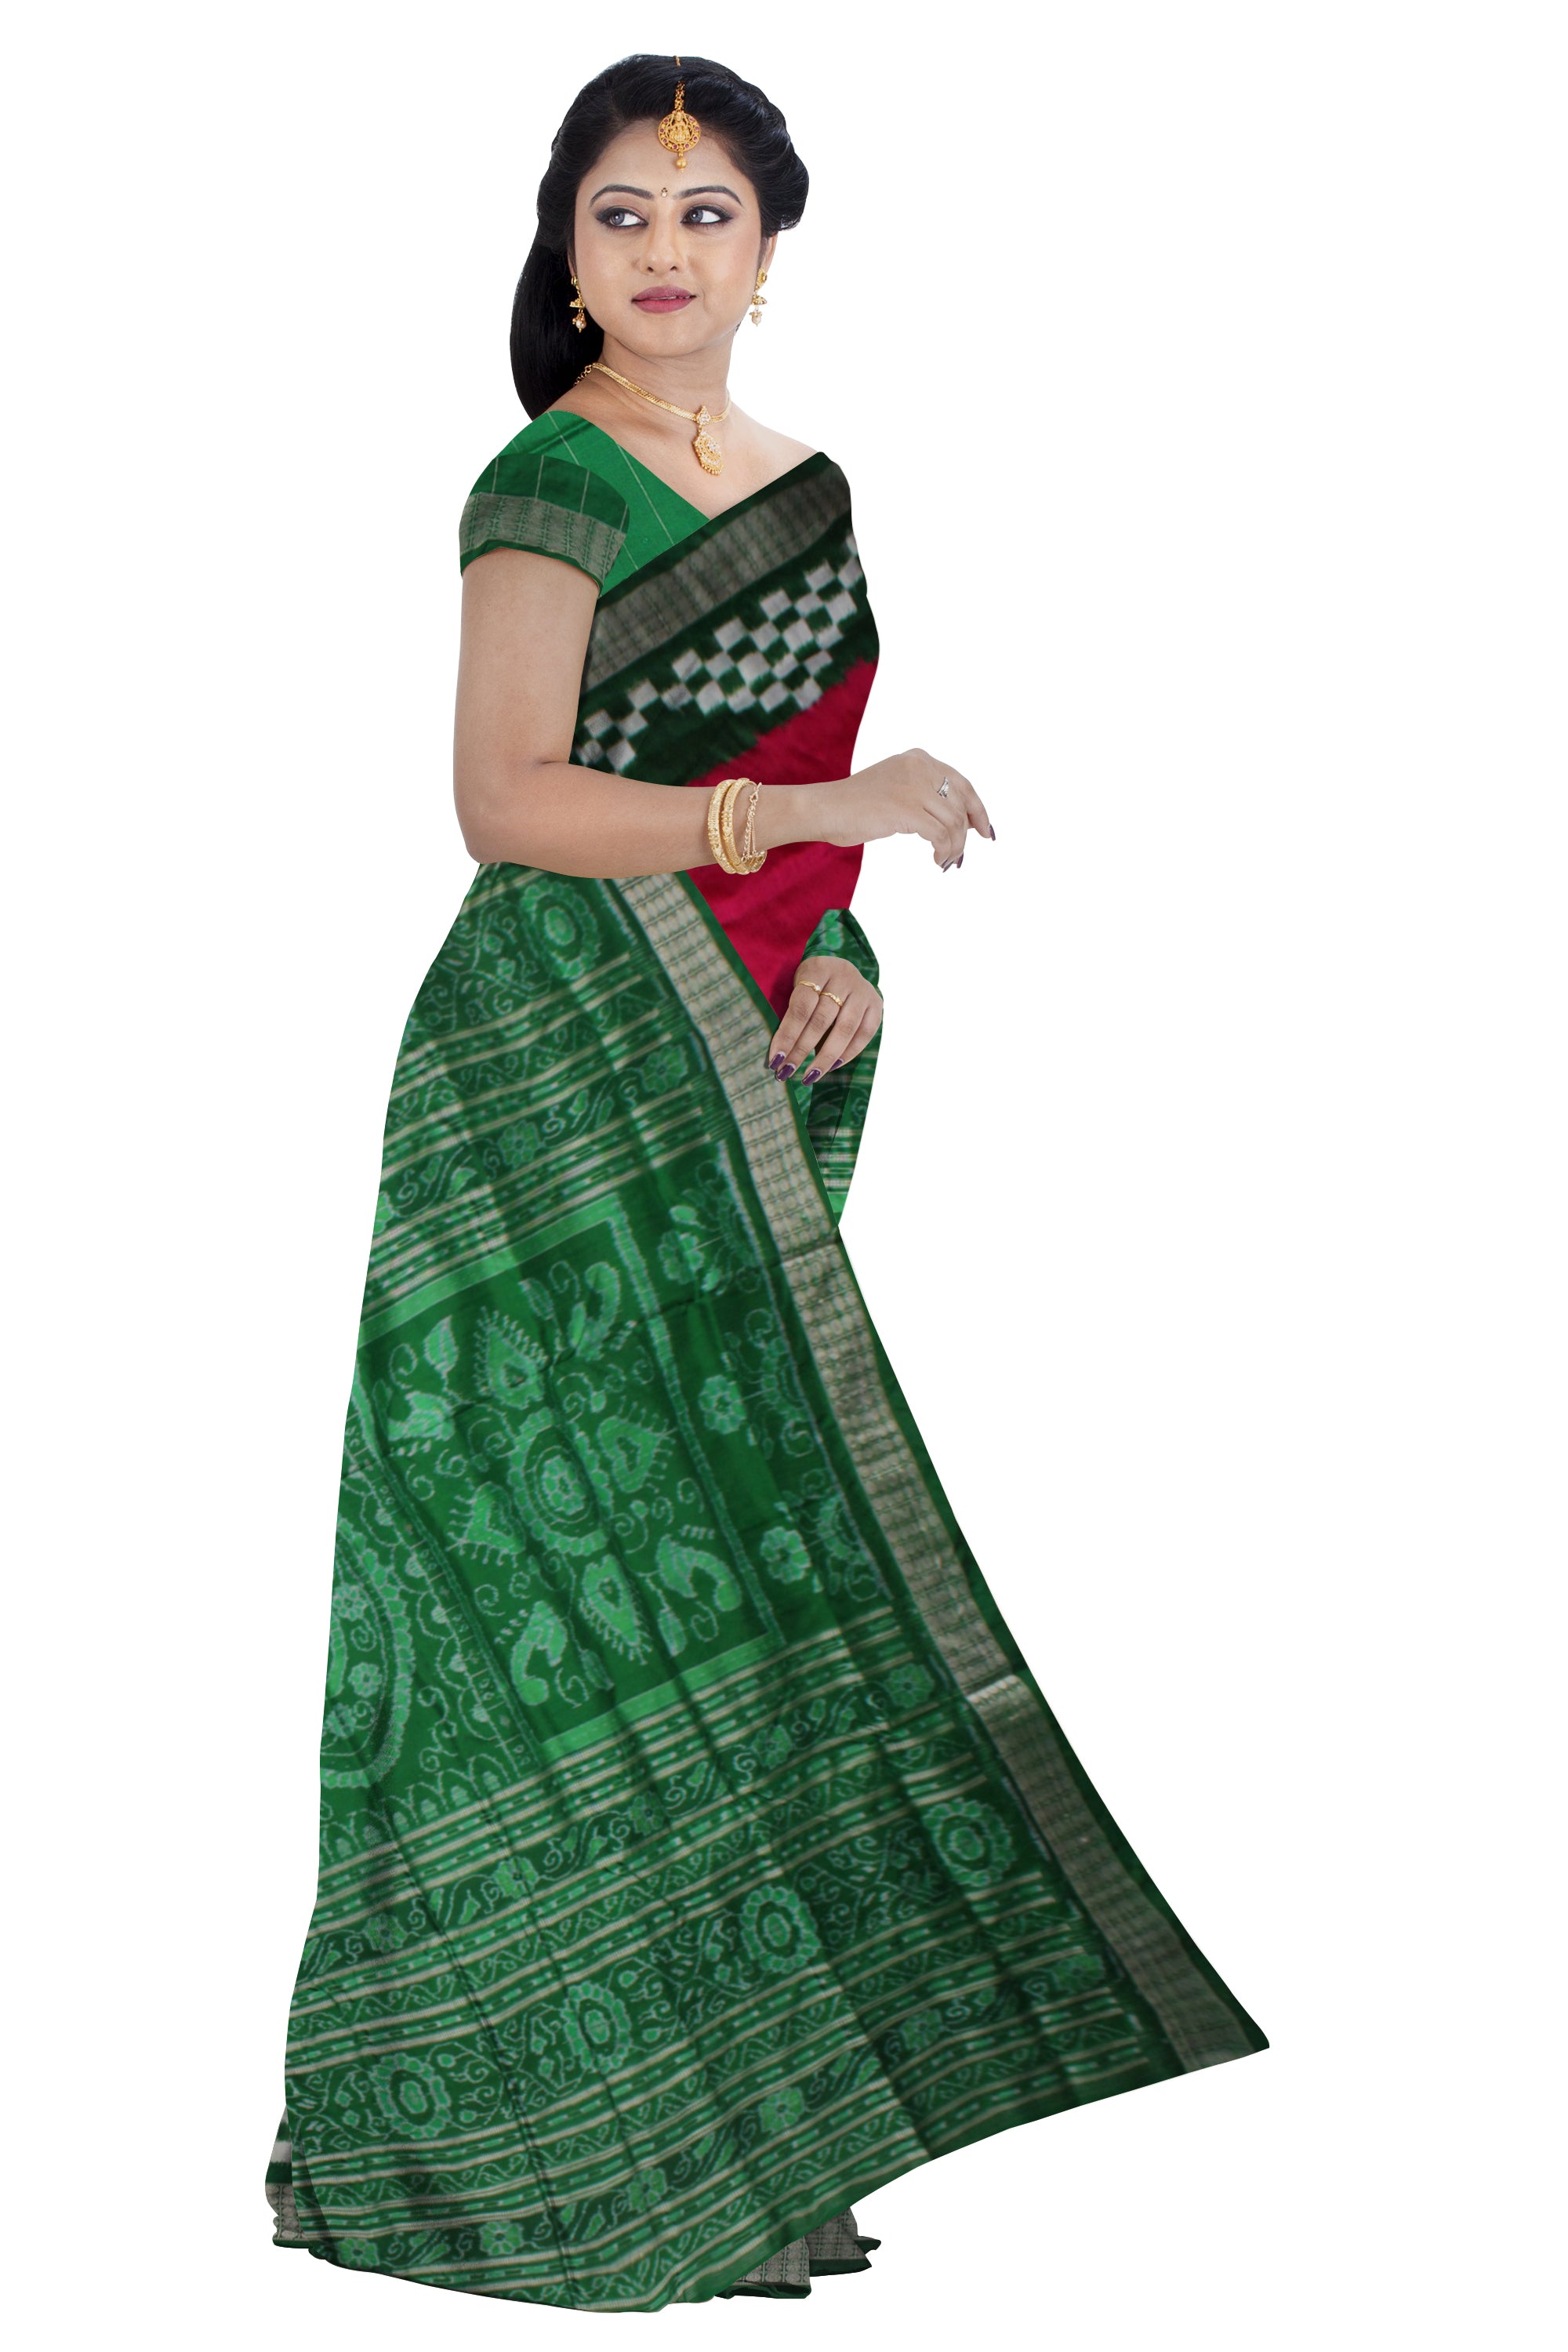 LATEST DHADI PASAPALI PATTERN PURE SILK SAREE IS  RANI-PINK AND GREEN COLOR BASE,ATTACHED WITH MATCHING BLOUSE PIECE. - Koshali Arts & Crafts Enterprise